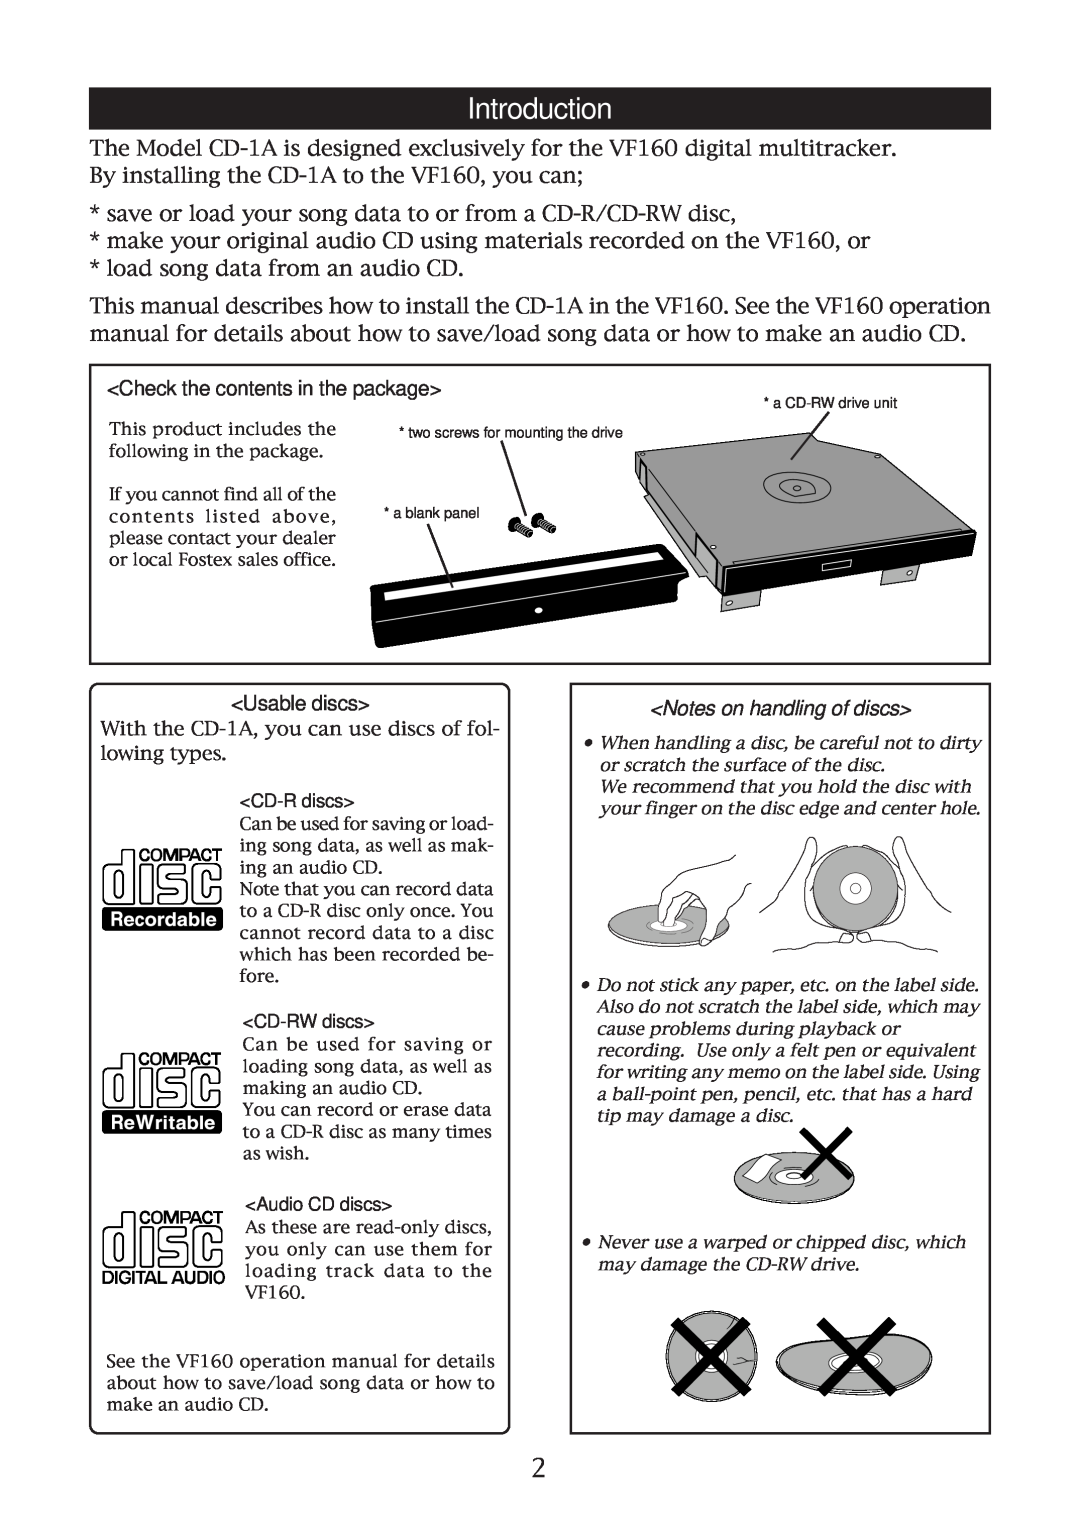 Fostex CD-1A installation manual Introduction, Check the contents in the package, Usable discs, Notes on handling of discs 